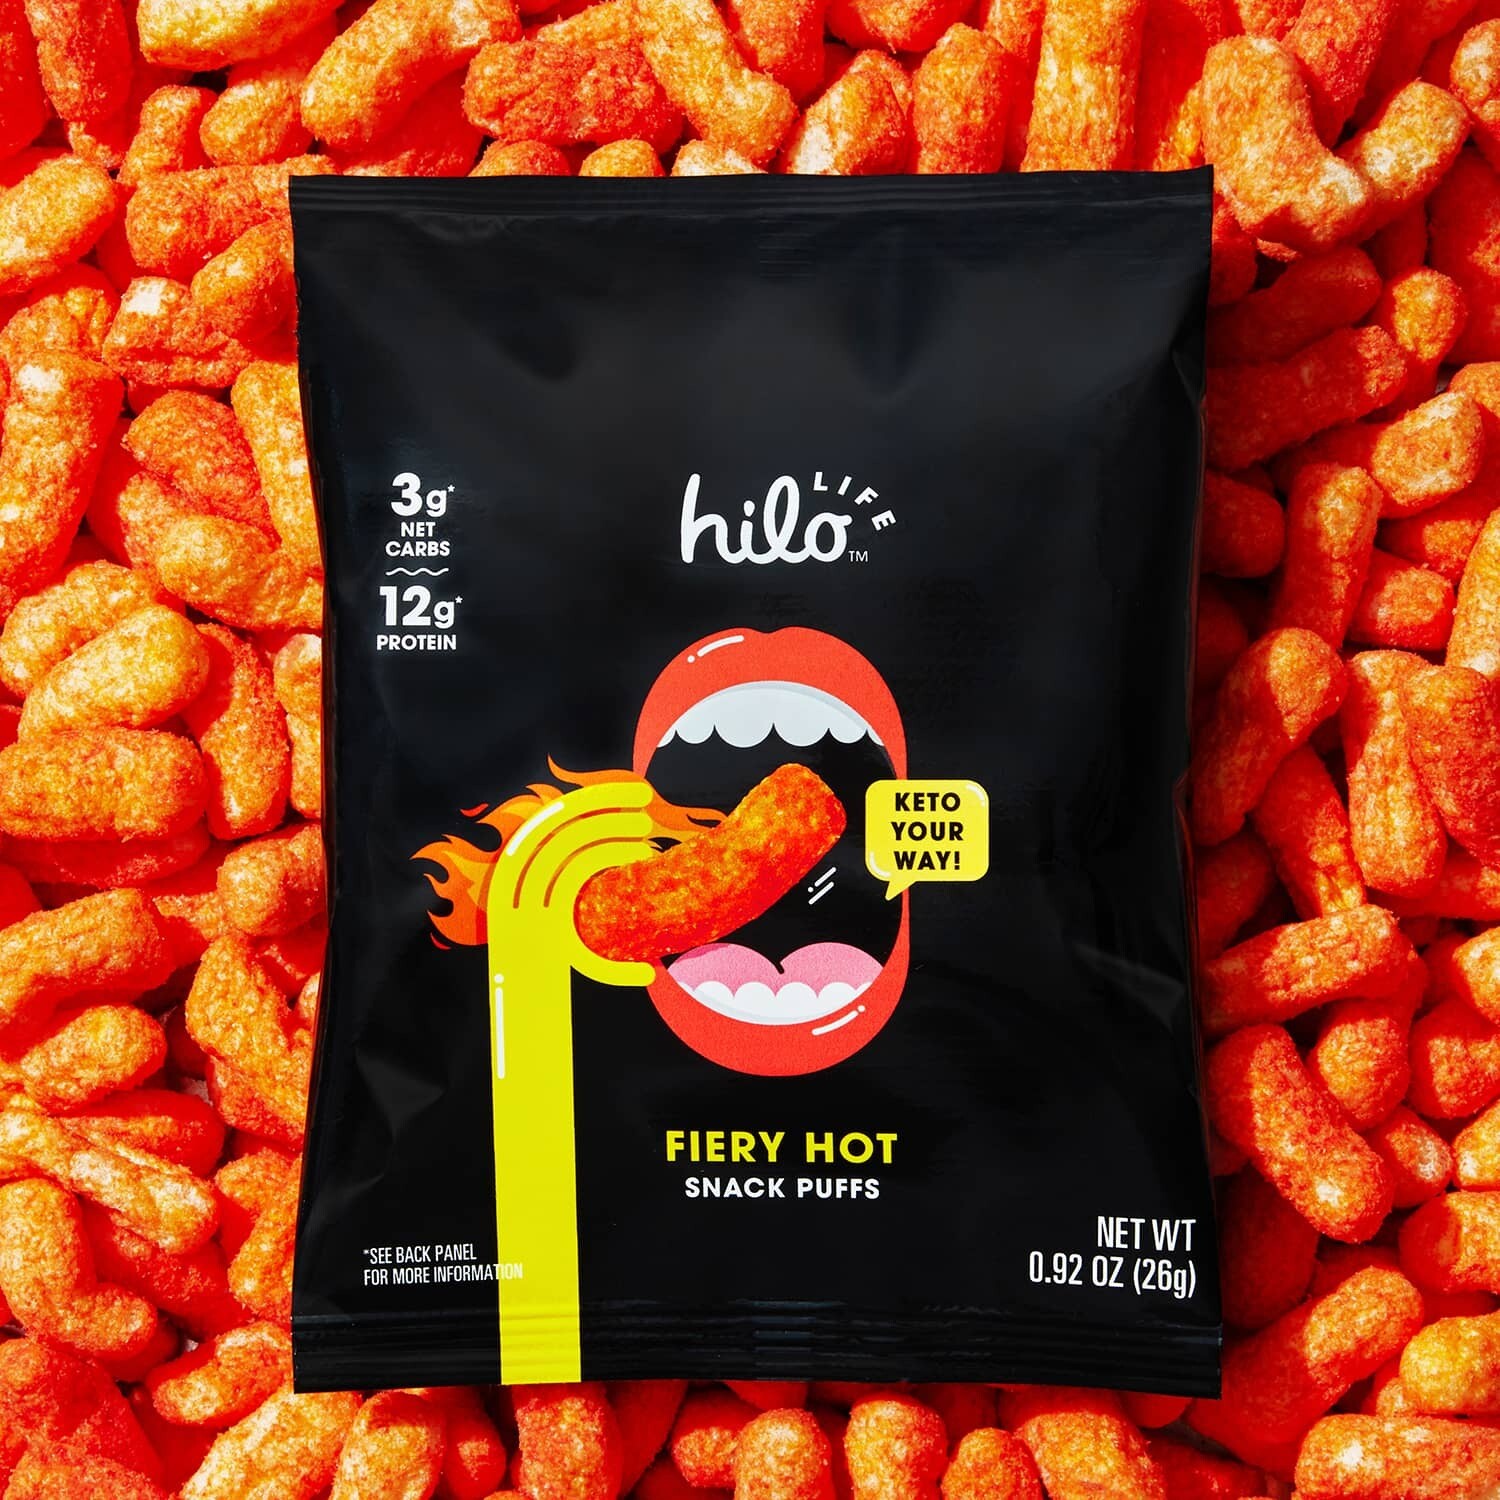 Life Hilo Fiery Hot Protein Snack Puffs KETO